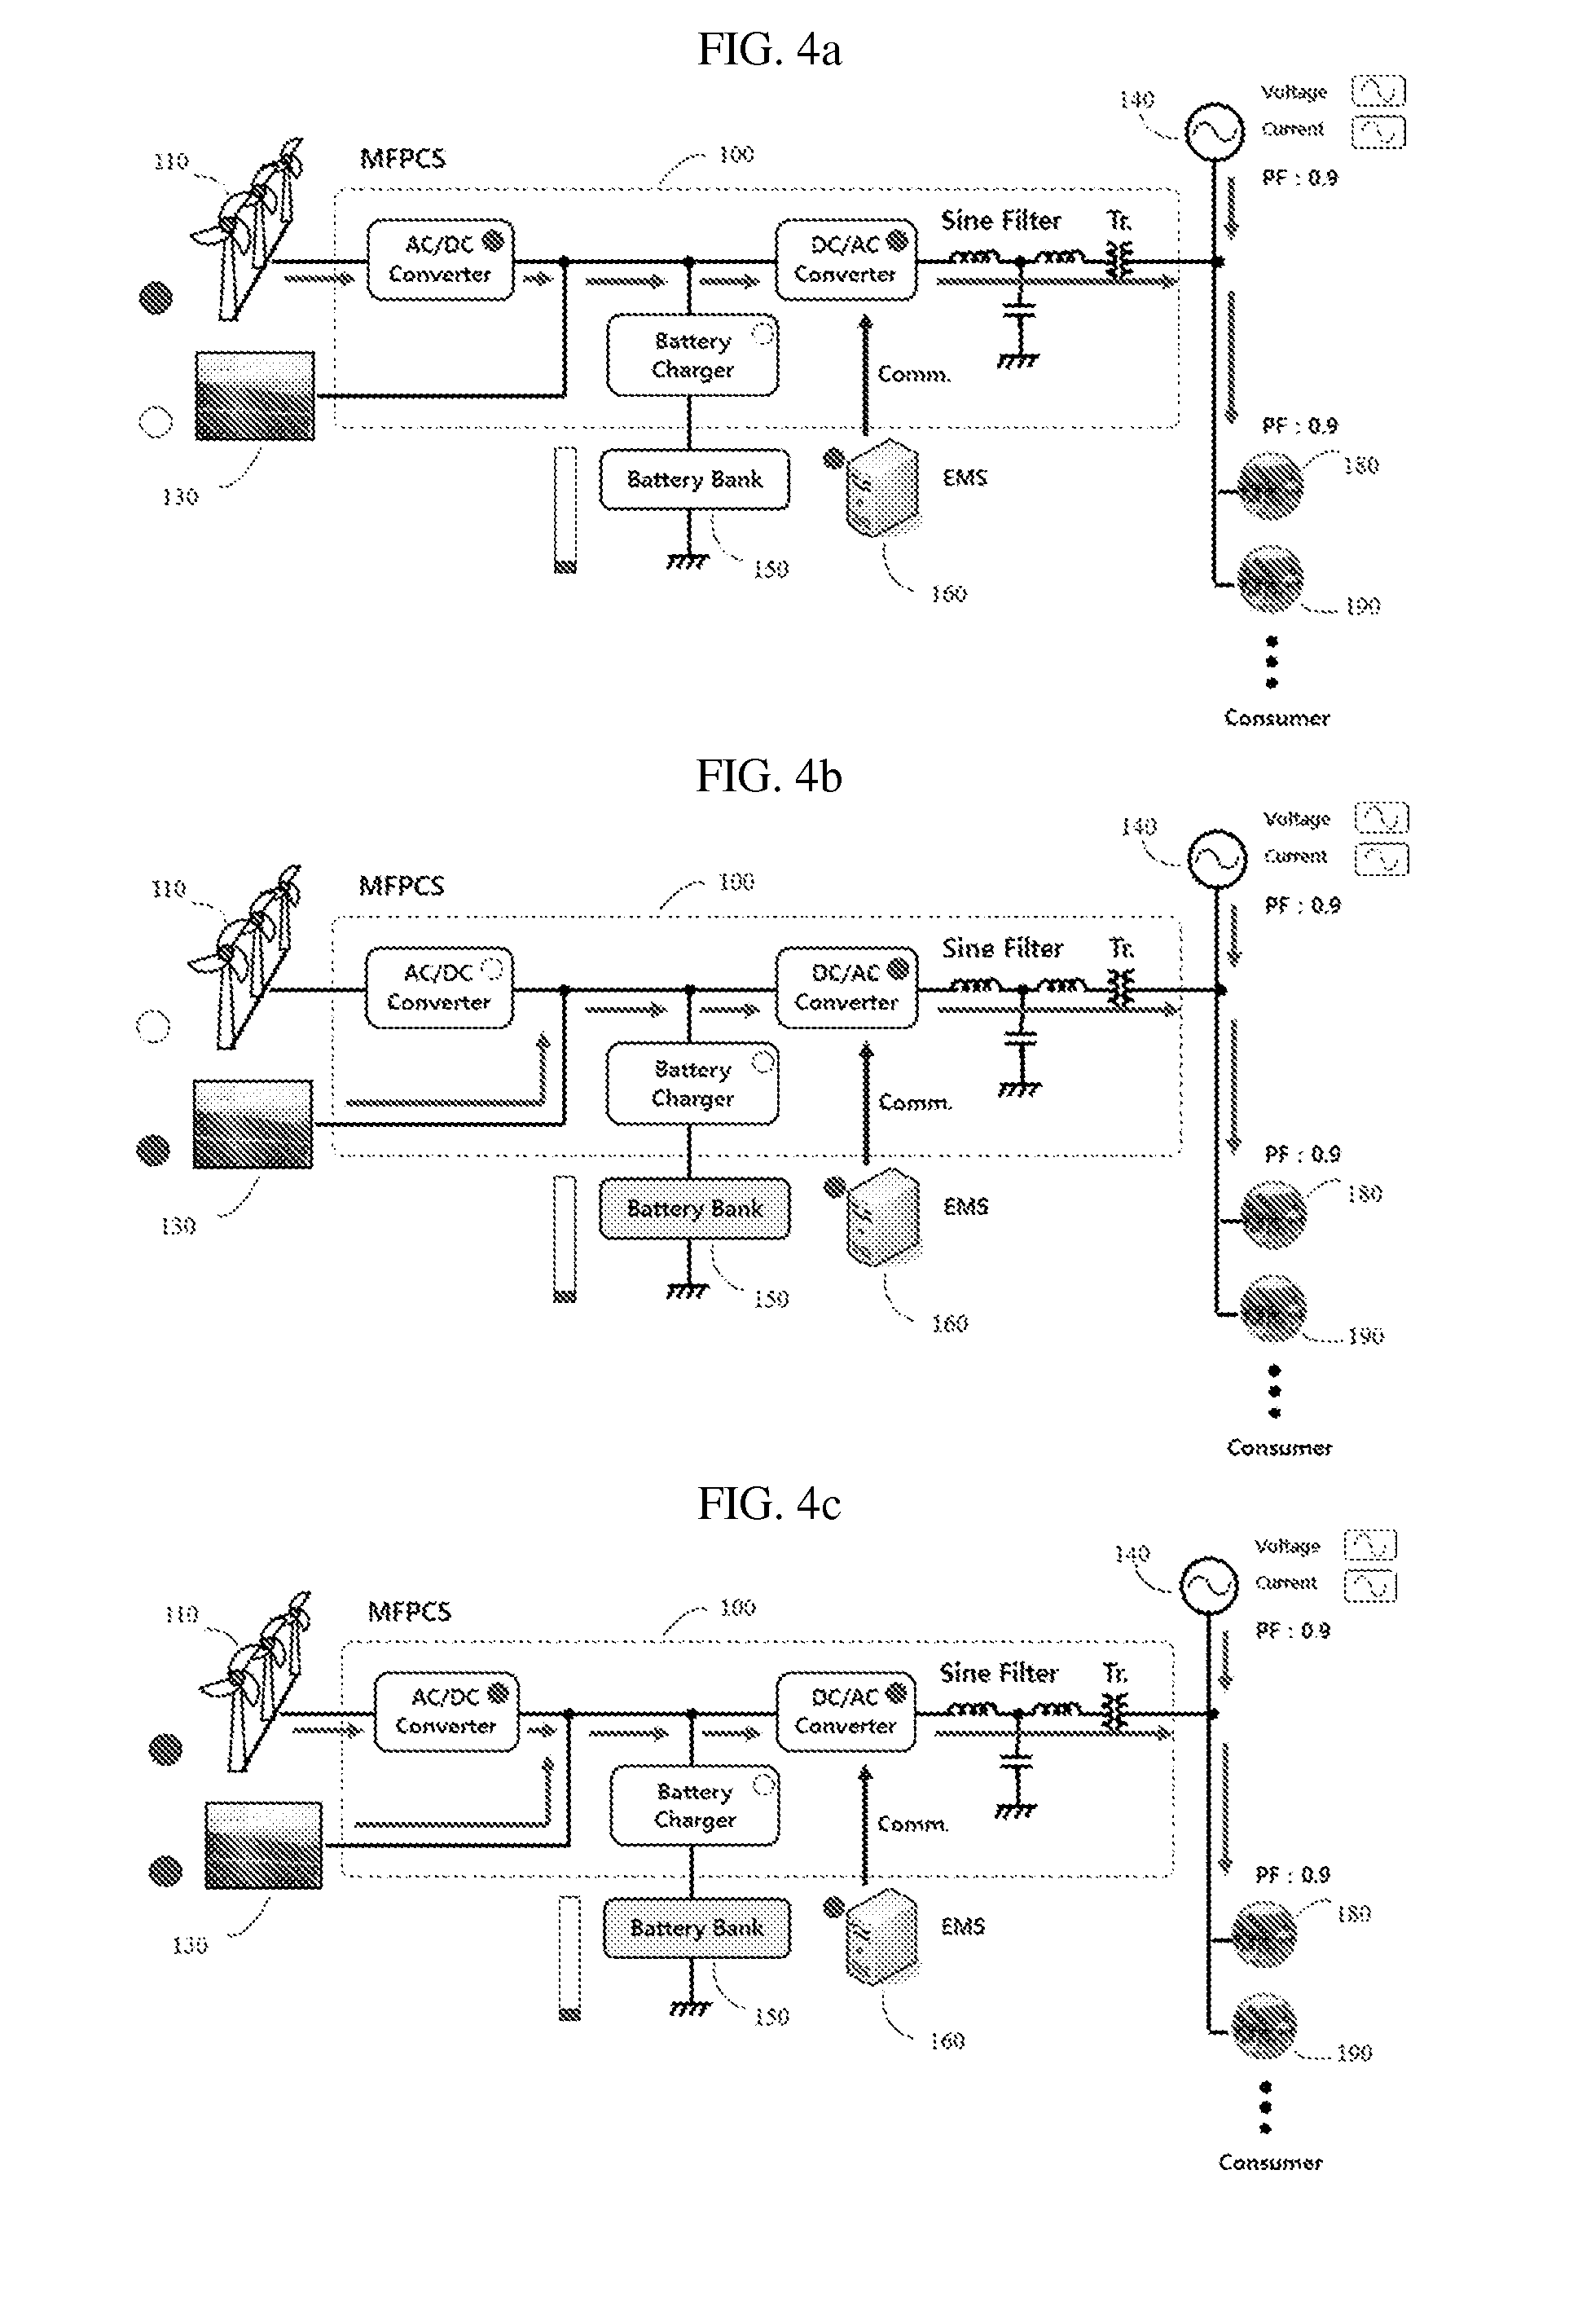 Method and device for multifunctional power conversion employing a charging device and having reactive power control